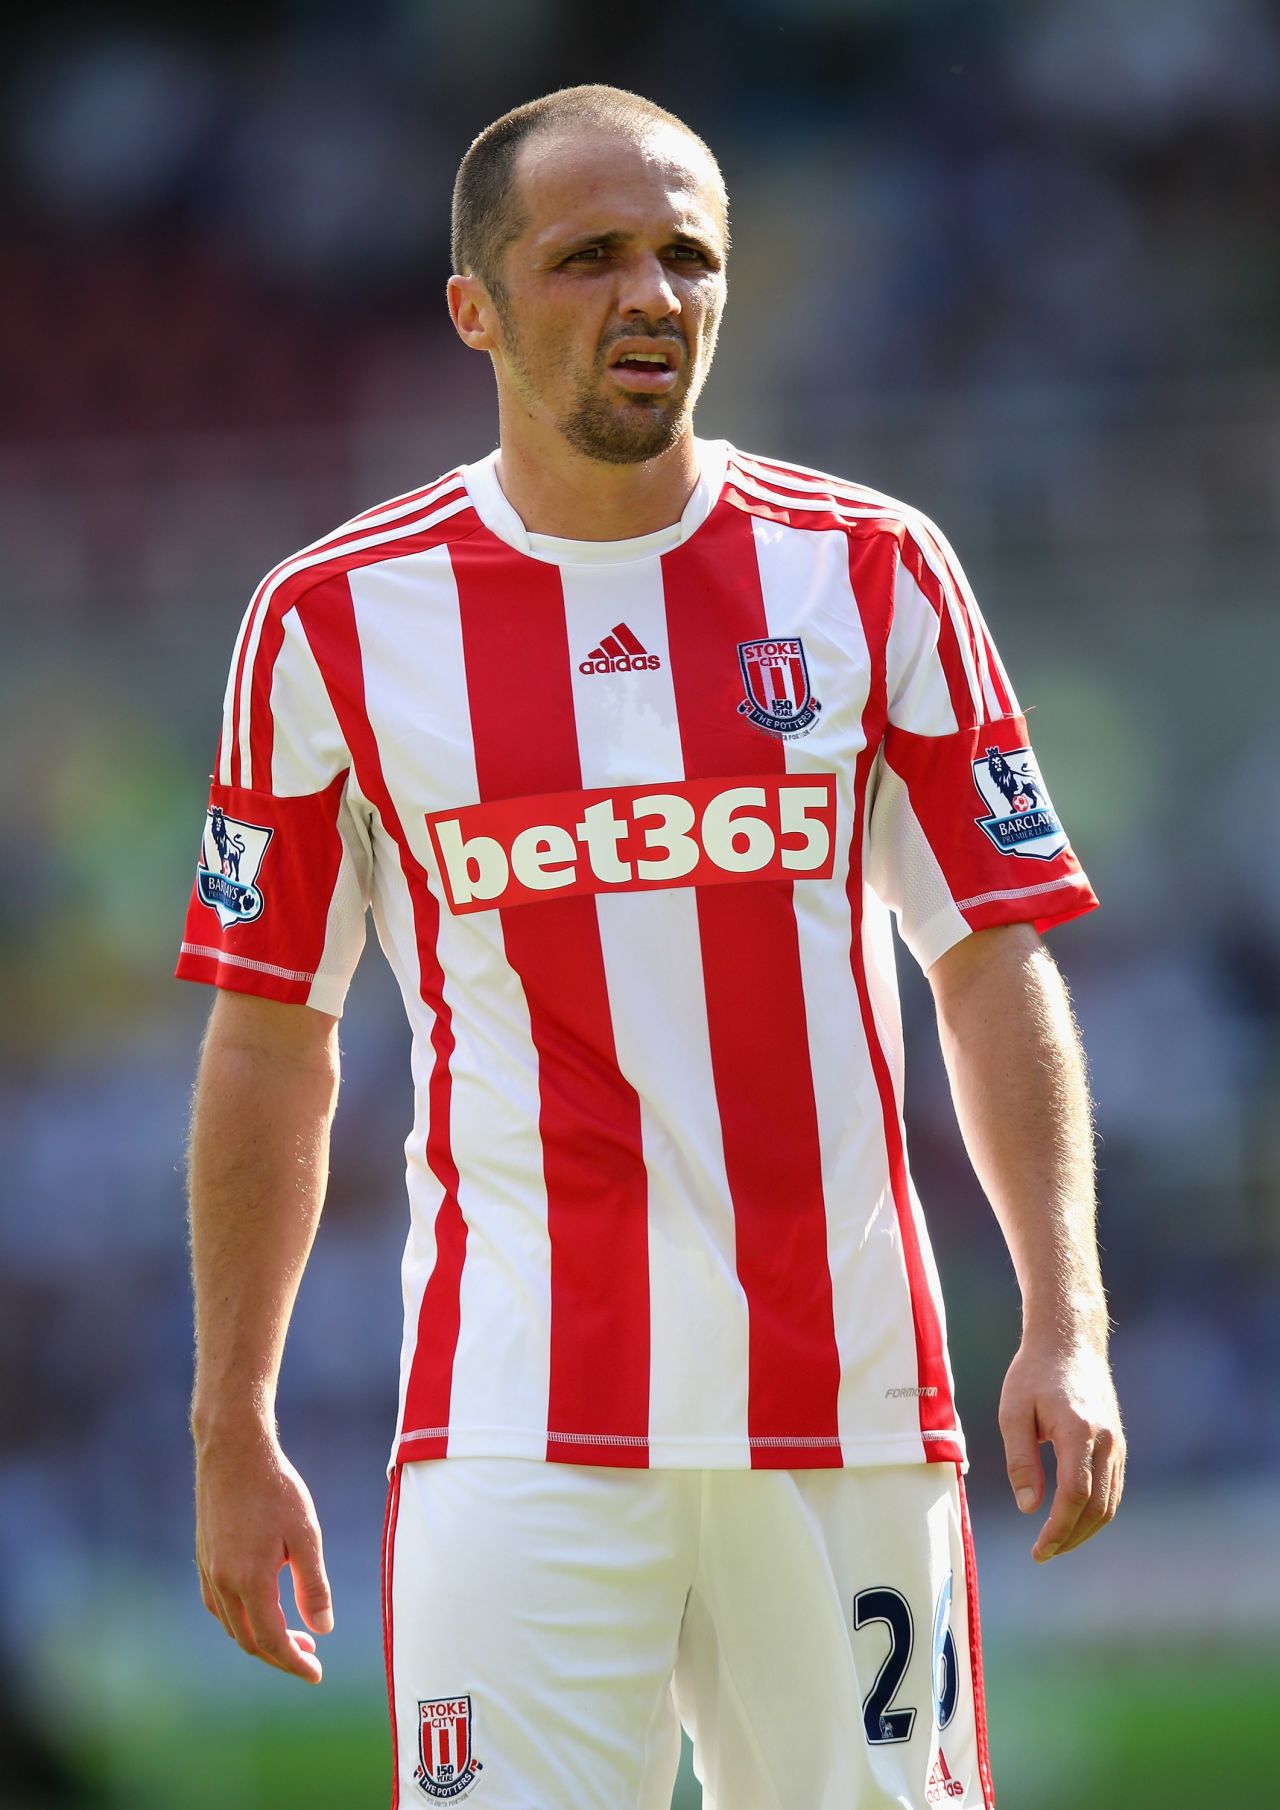 Matthew Etherington is another English Premier League player to have succumbed to gambling addiction. In order to overcome his problems, the Stoke City winger attends Gambling Anonymous meetings twice a week.